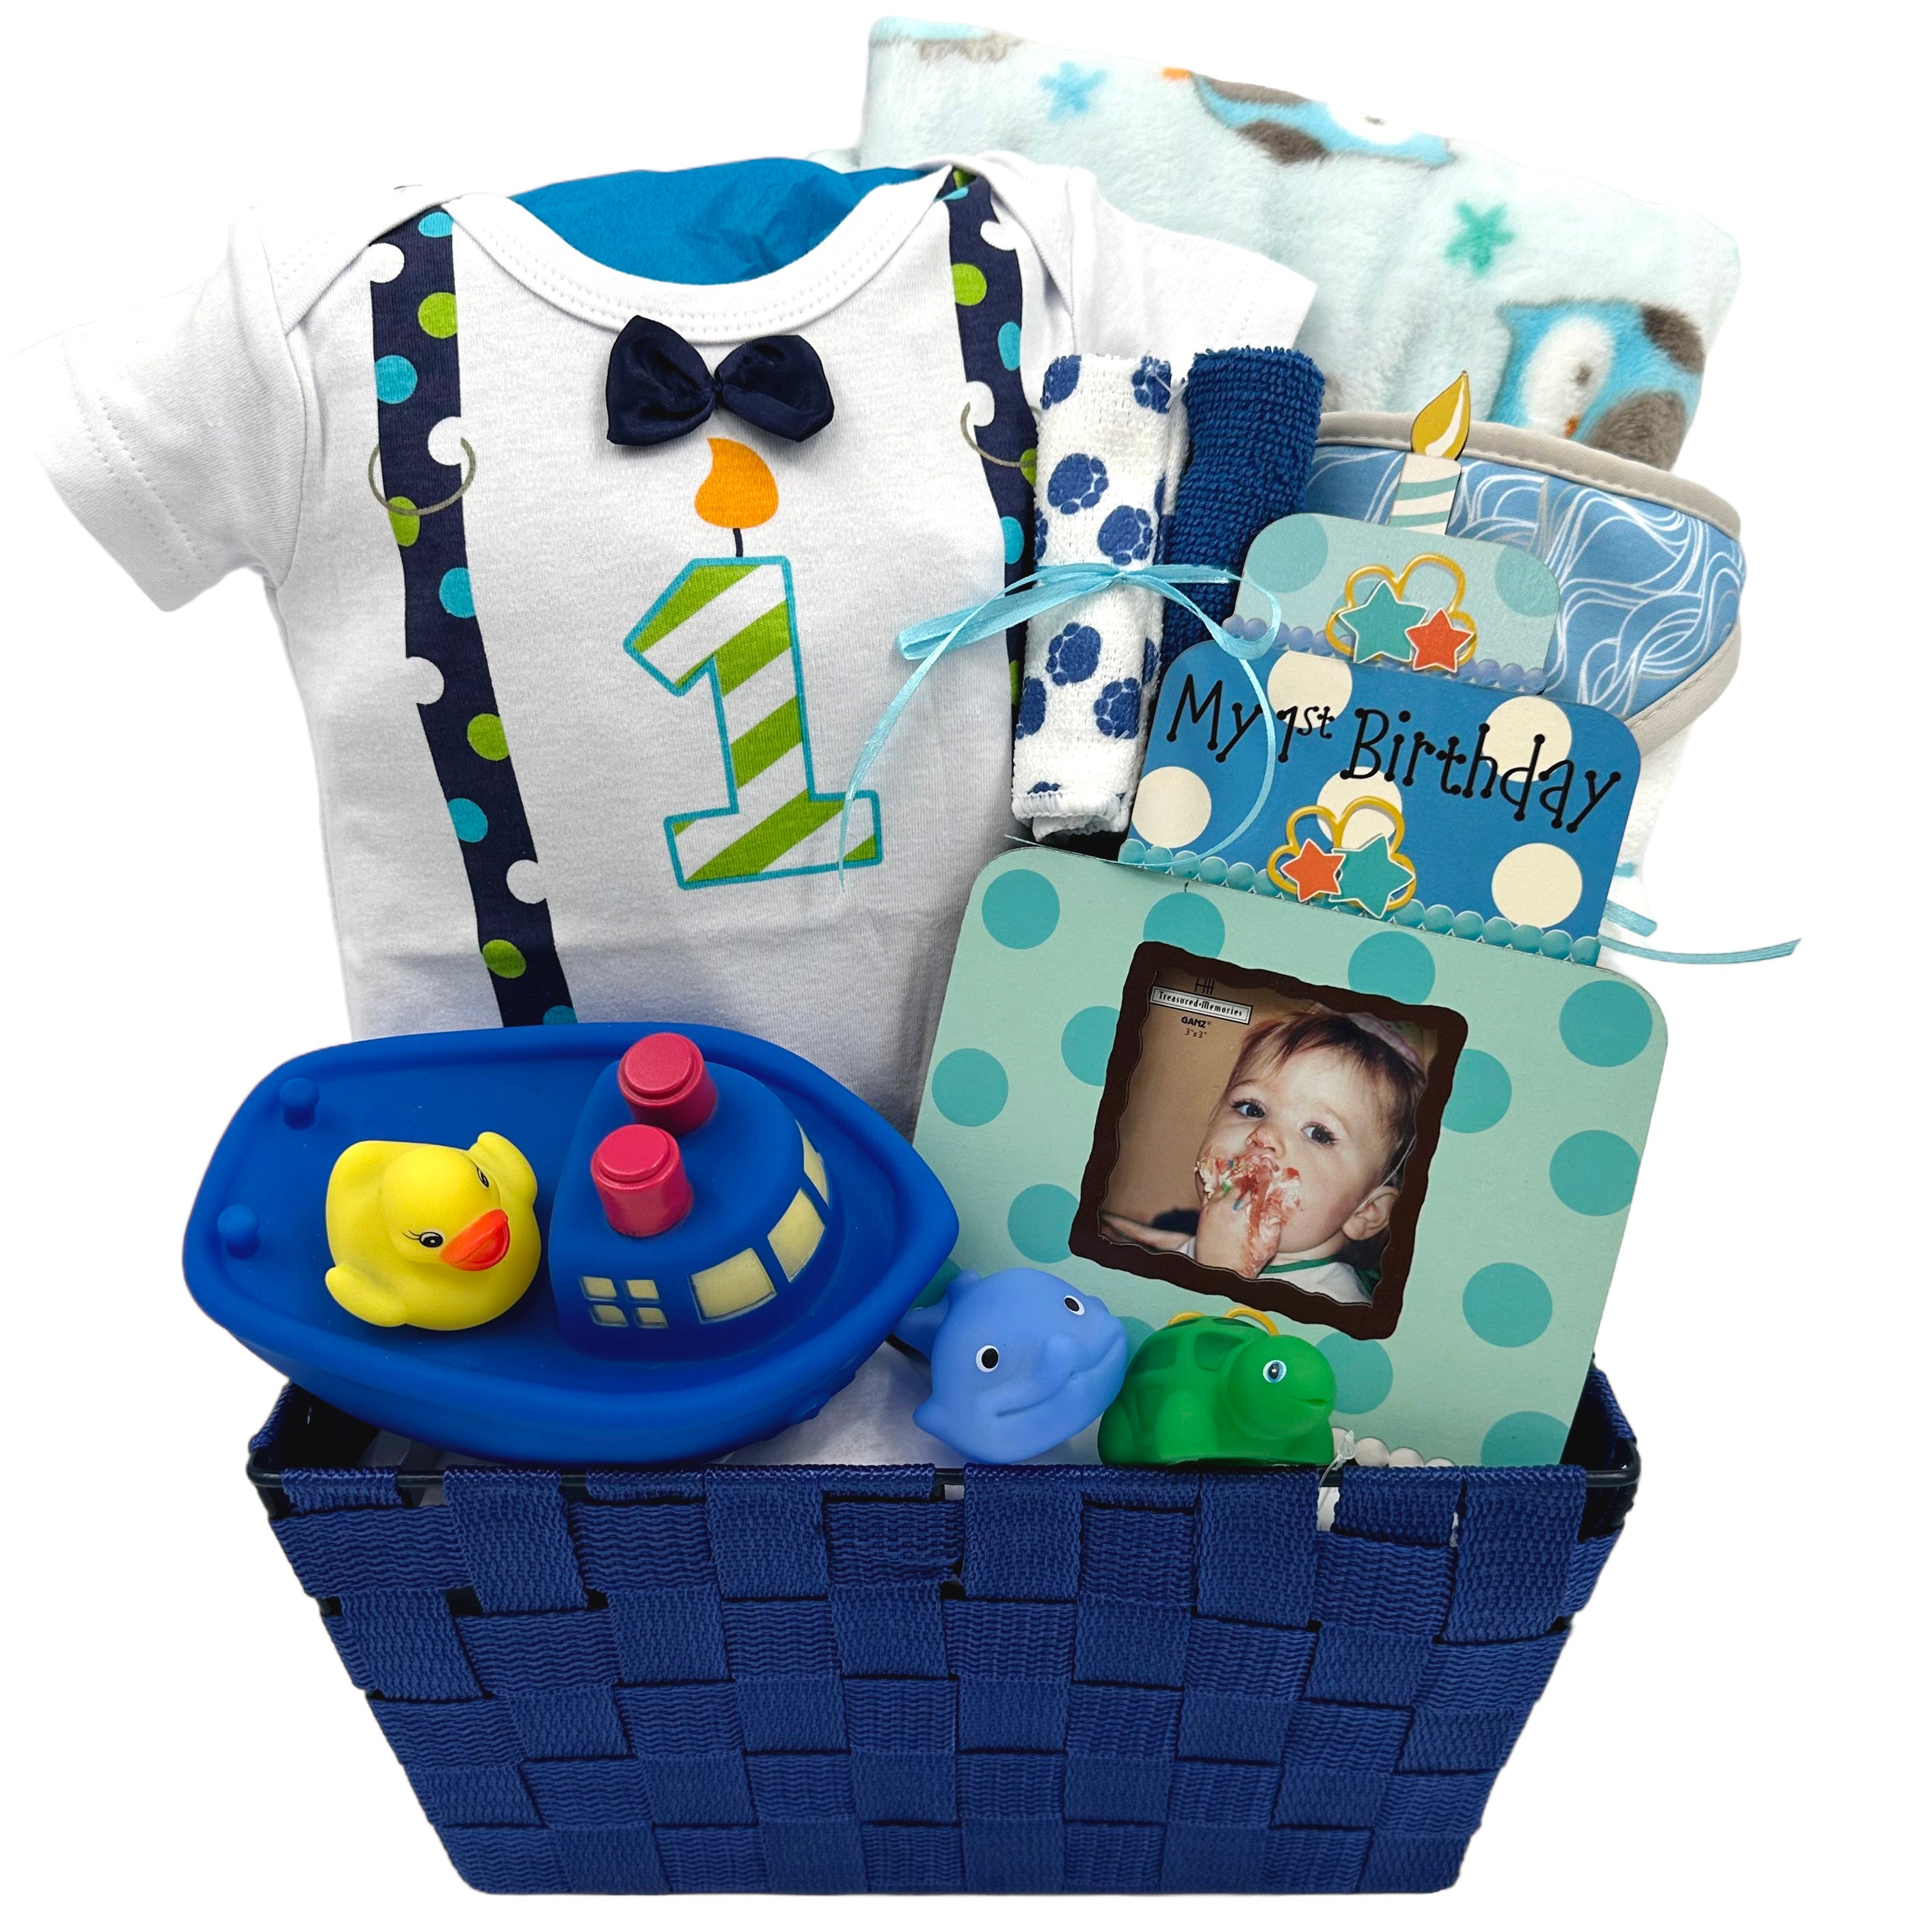 1st BIRTHDAY GIFTS FOR A BABY BOY first/new/blue/cards | eBay